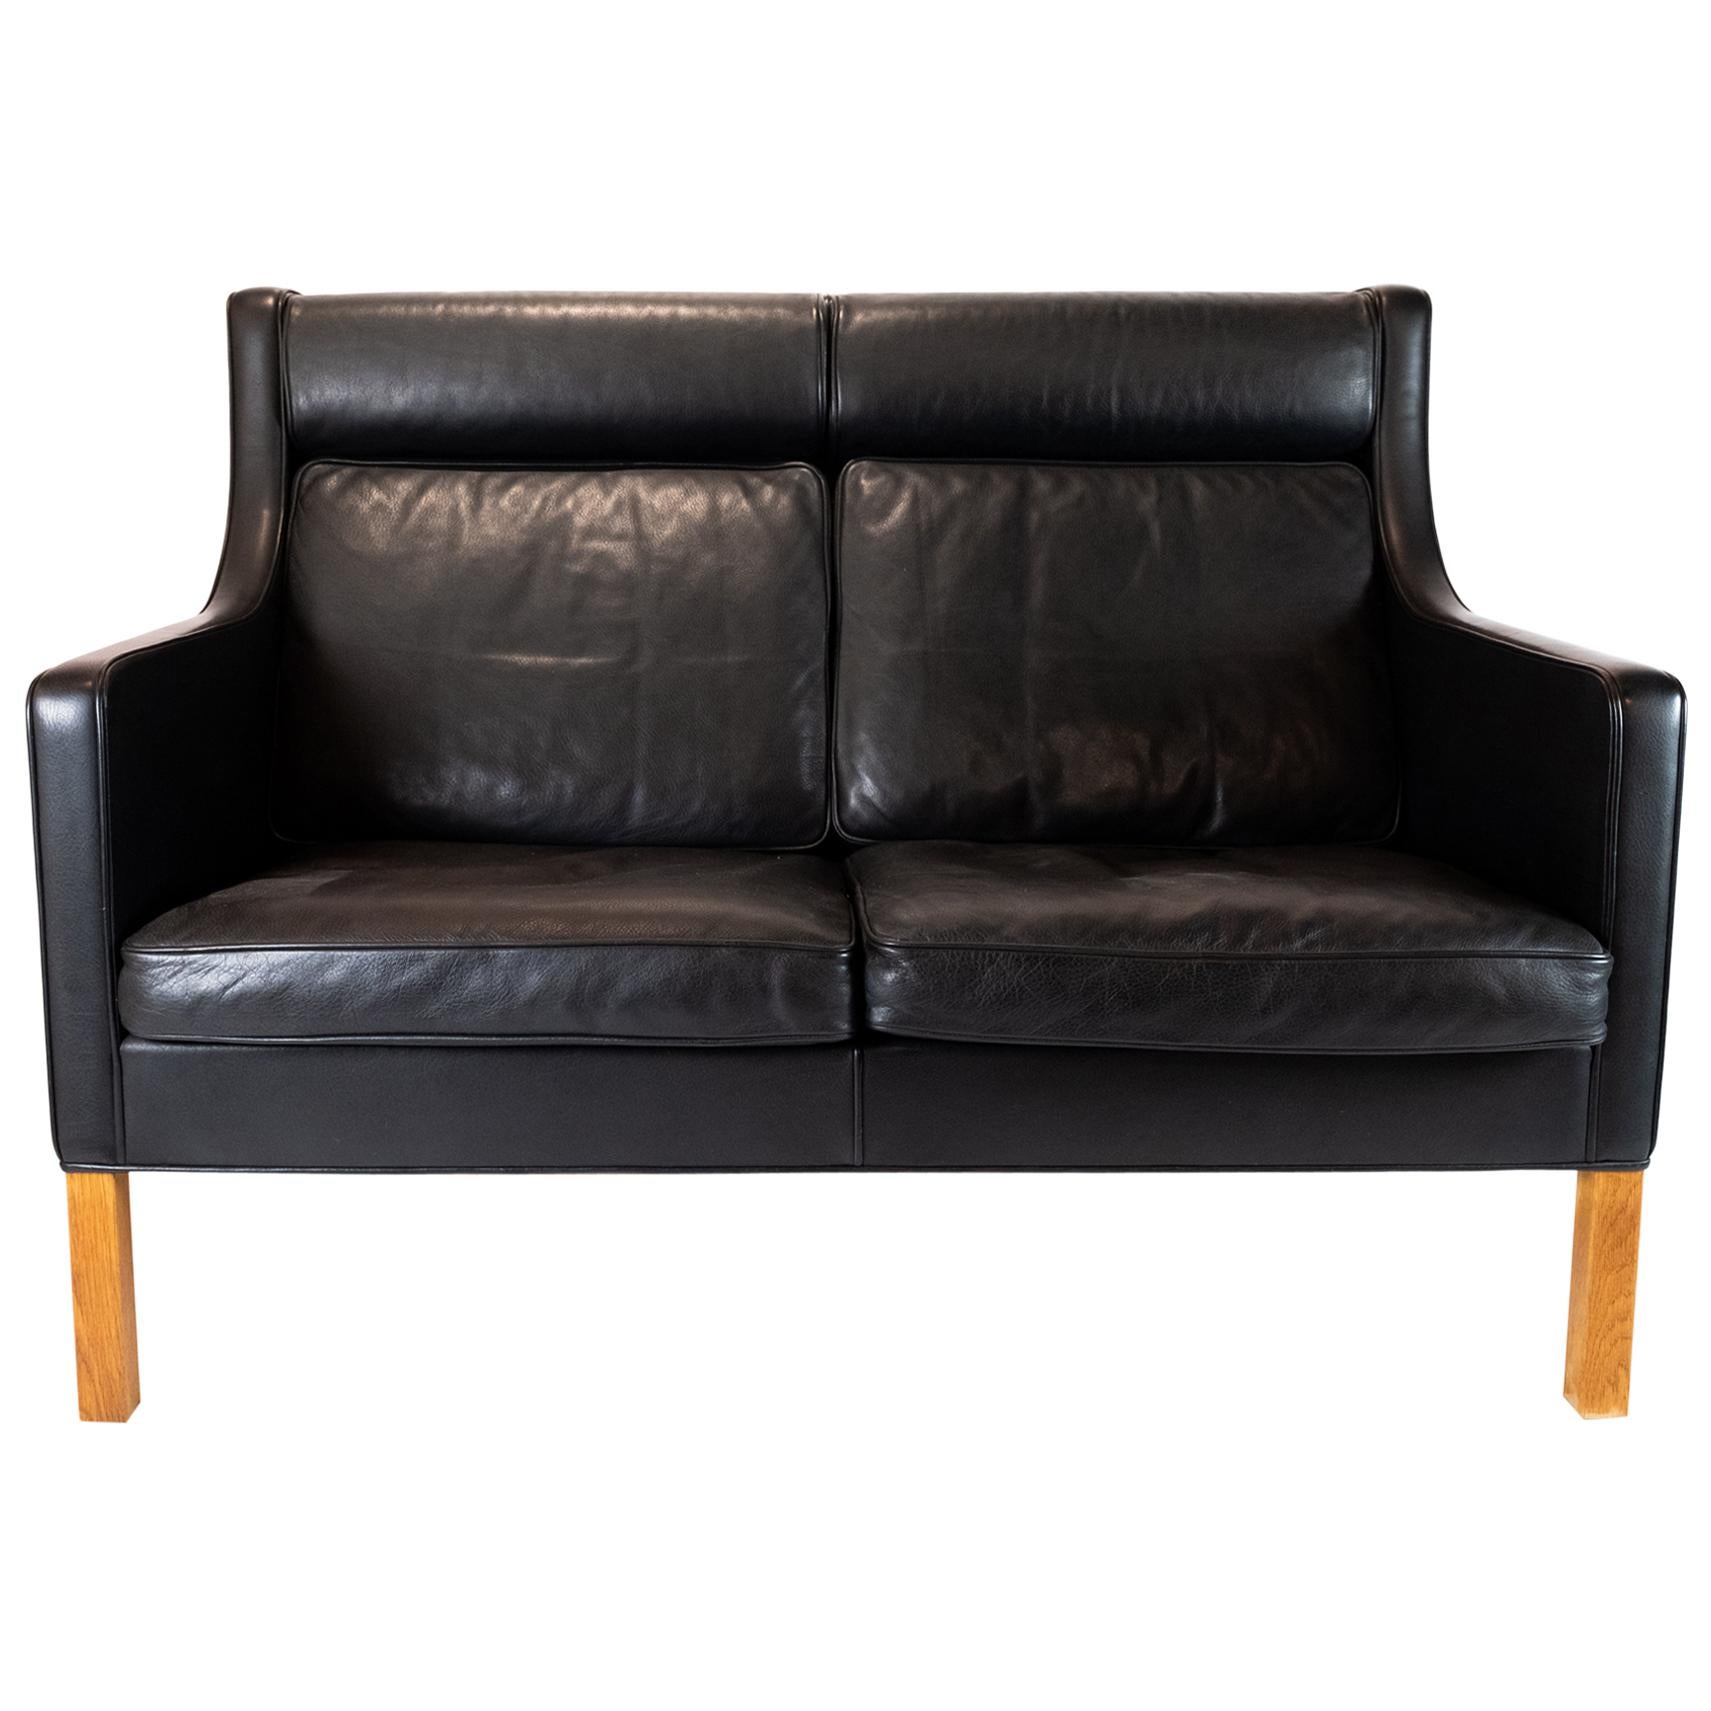 Kupe 2-Seat Sofa Model 2192 Made In Black Leather By Børge Mogensen From 1970s For Sale